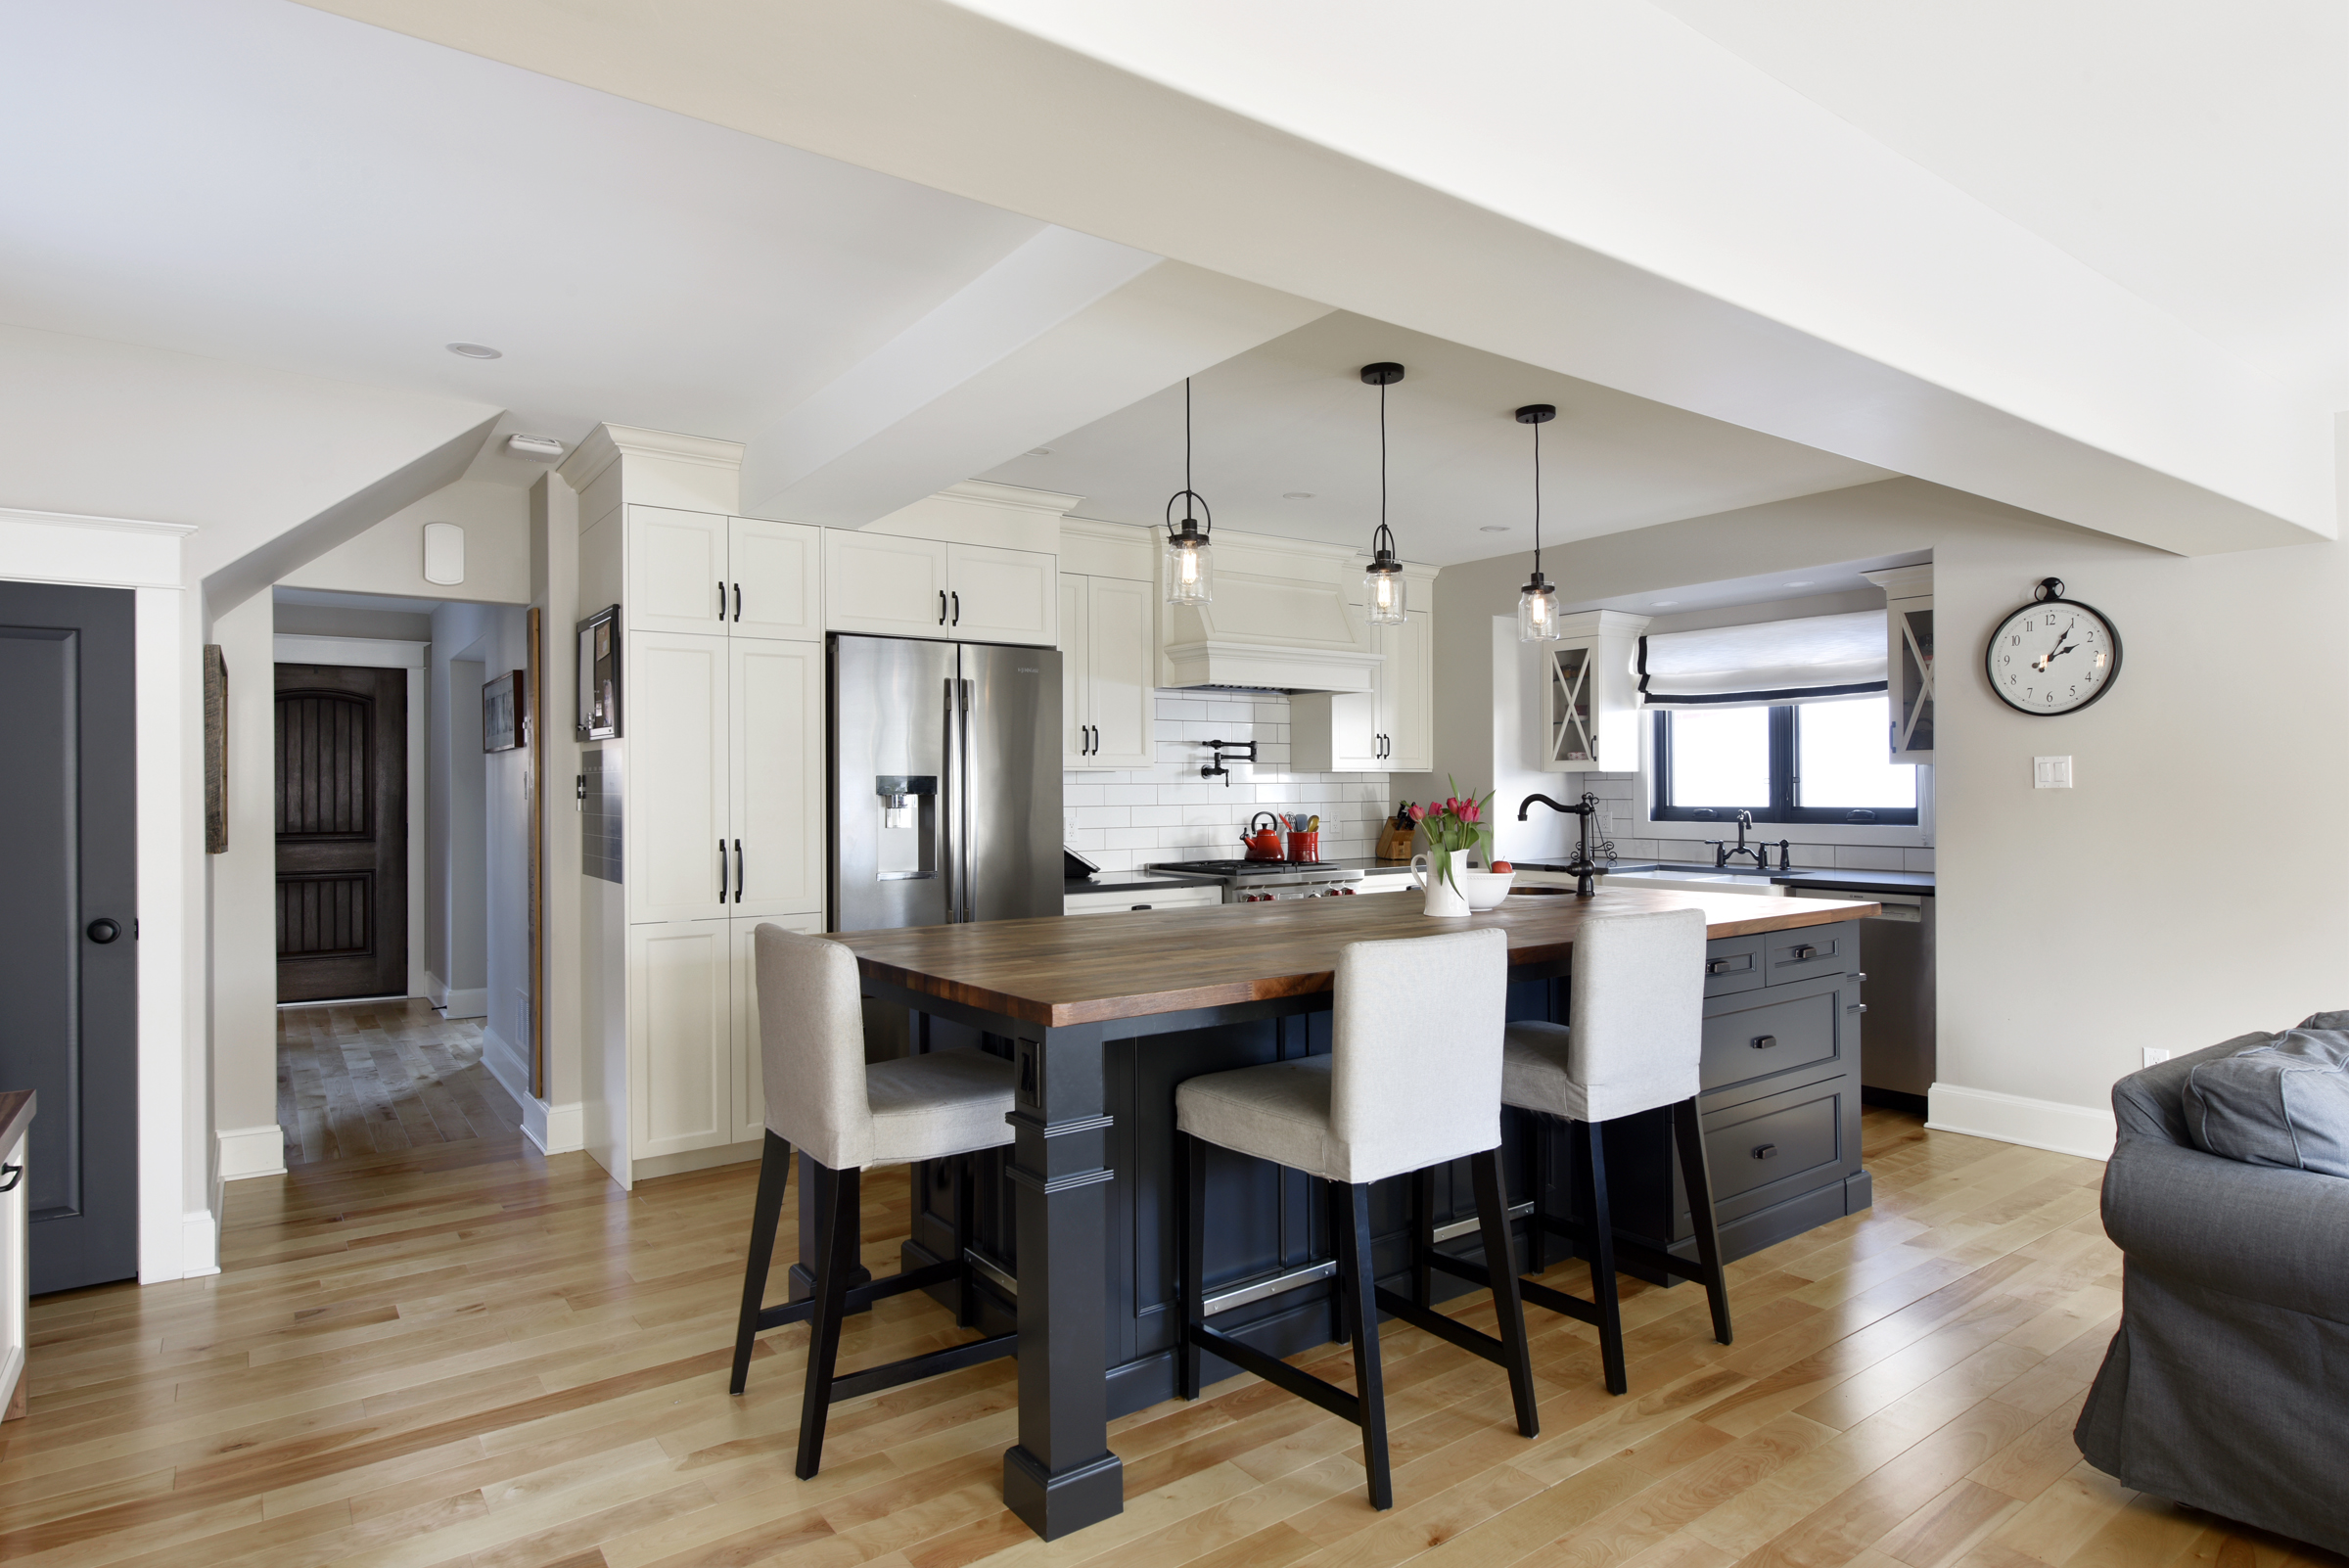 Amsted Design-Build, Ottawa, ON: "Personalized Planning In The Kitchen” (Finalist, Kitchen - under $70,000, CHBA National Awards for Housing Excellence)